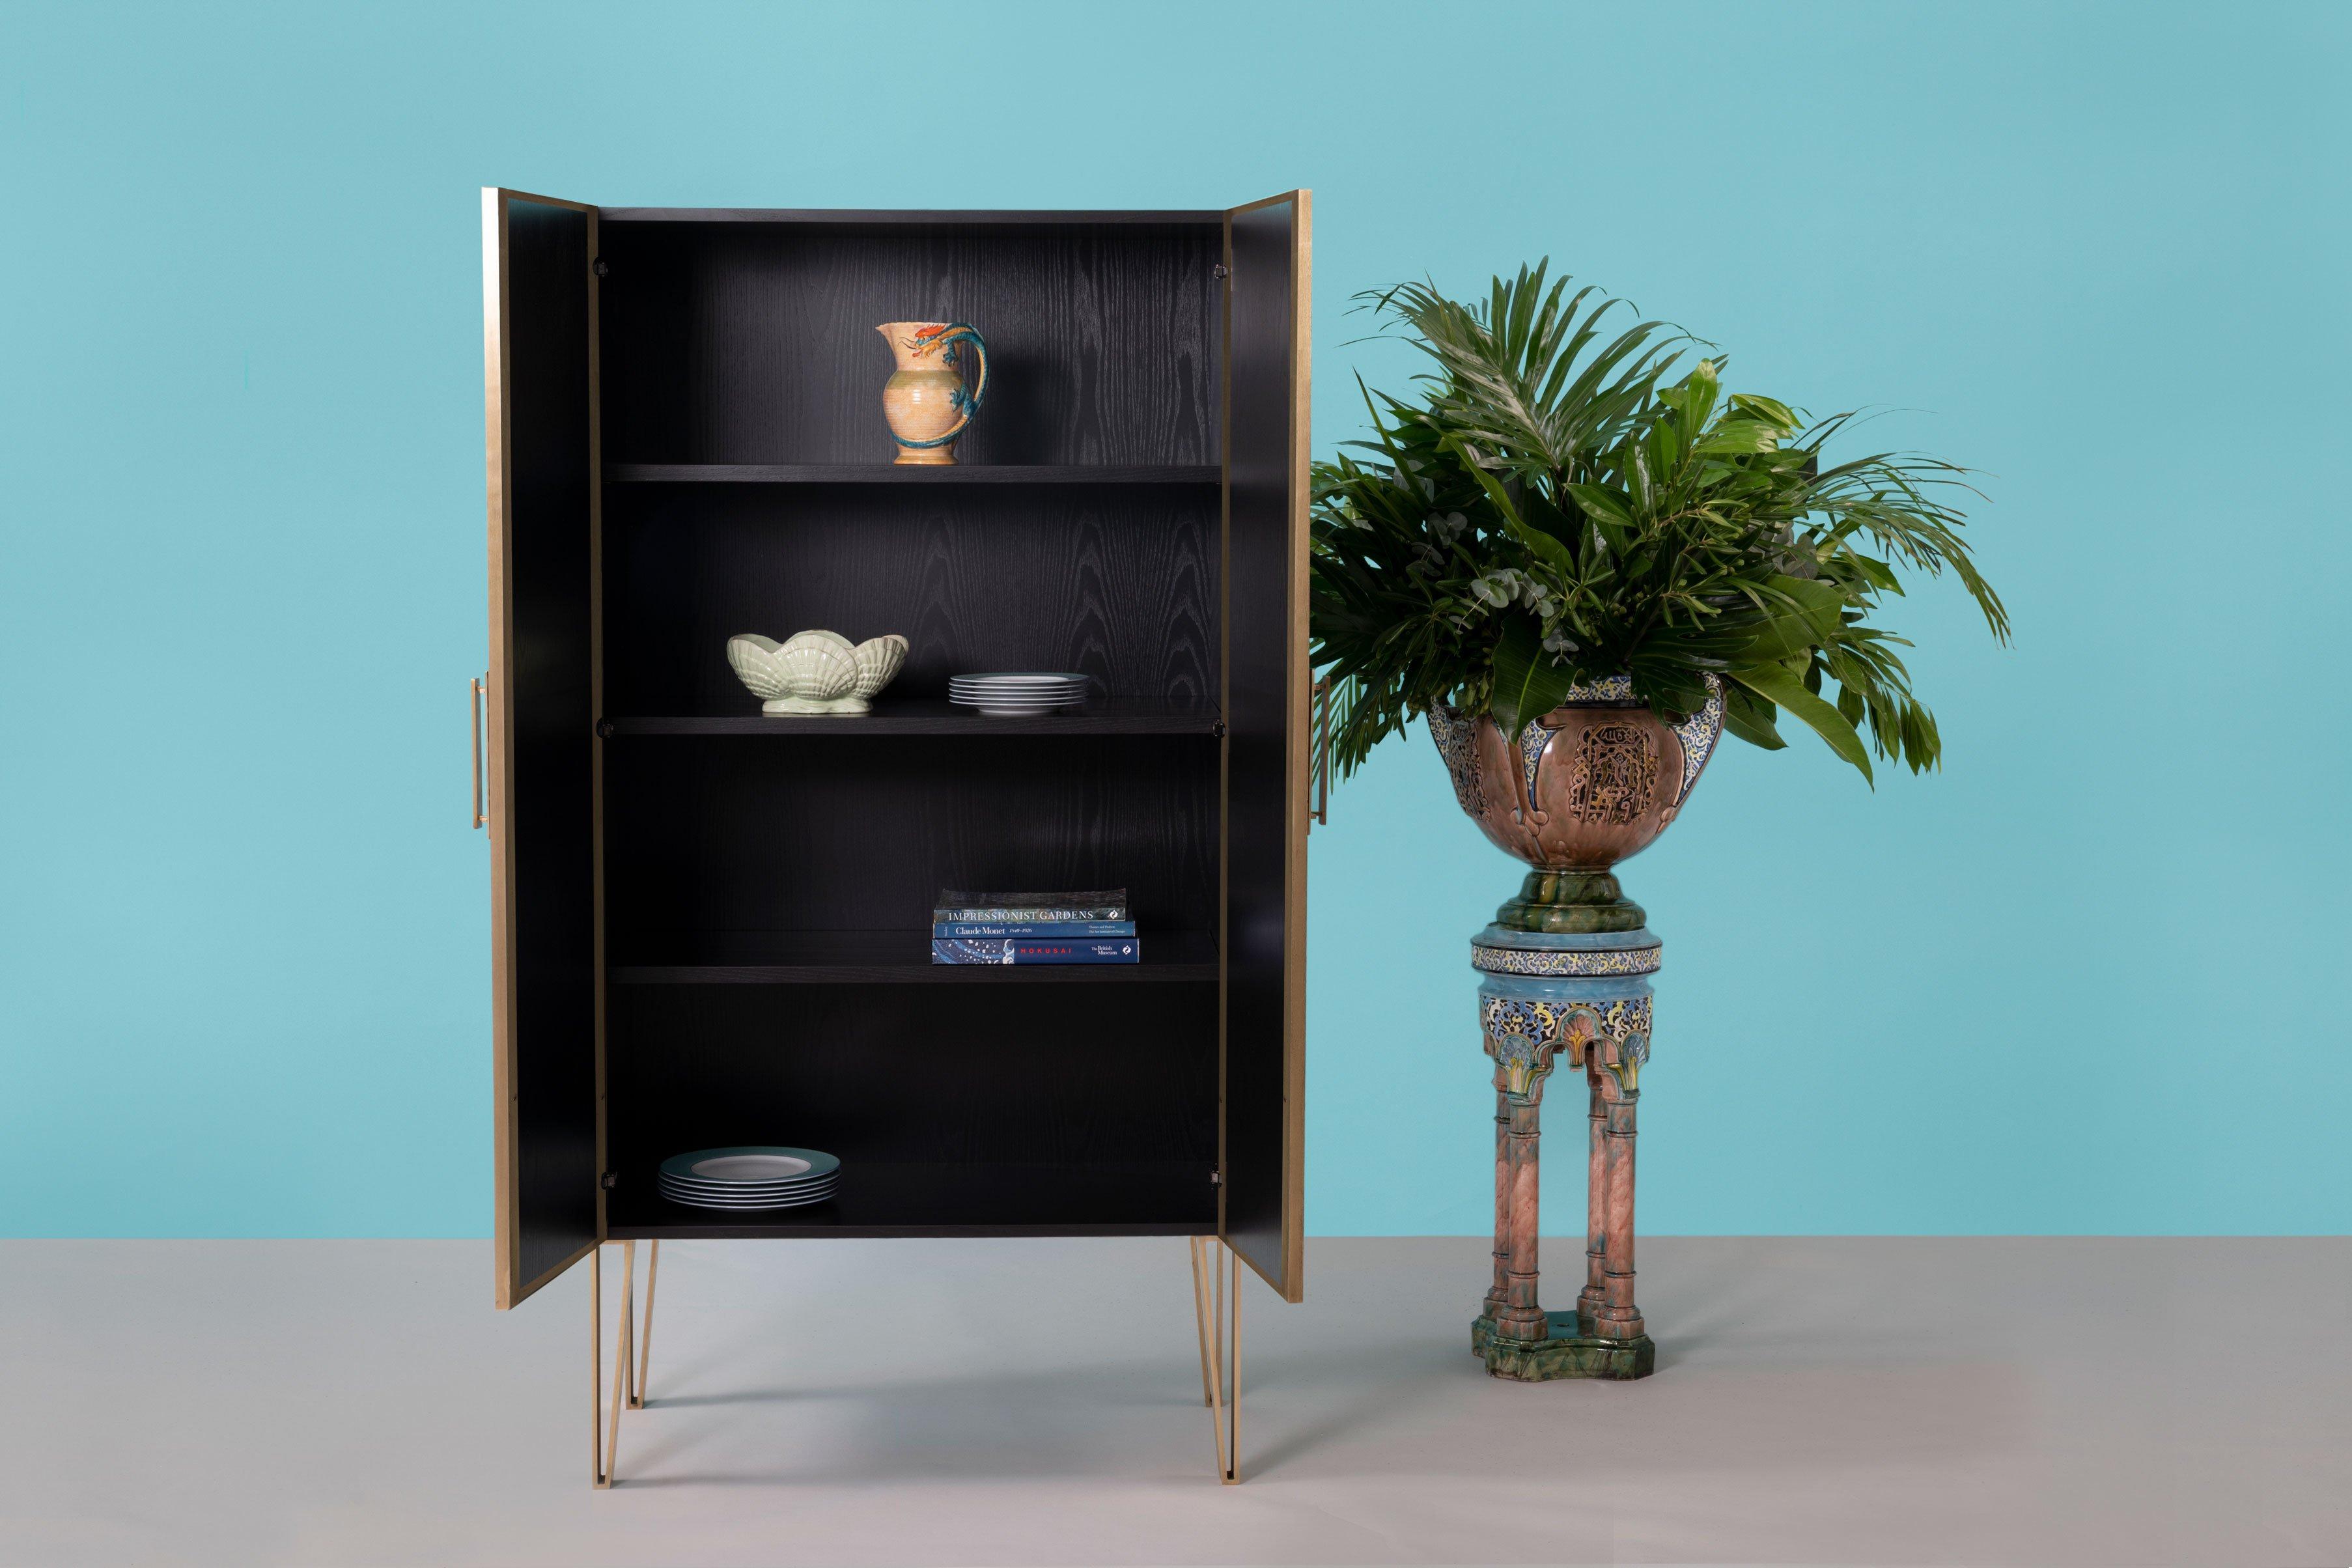 Fine Upholstered in Sophie Ward’s beautiful print, the Cordelia cabinet is a bold, confident choice for any interior.

Handcrafted in England from lacquered oak wood, this statement piece is upholstered in sumptuous silk-blend satin and beautifully